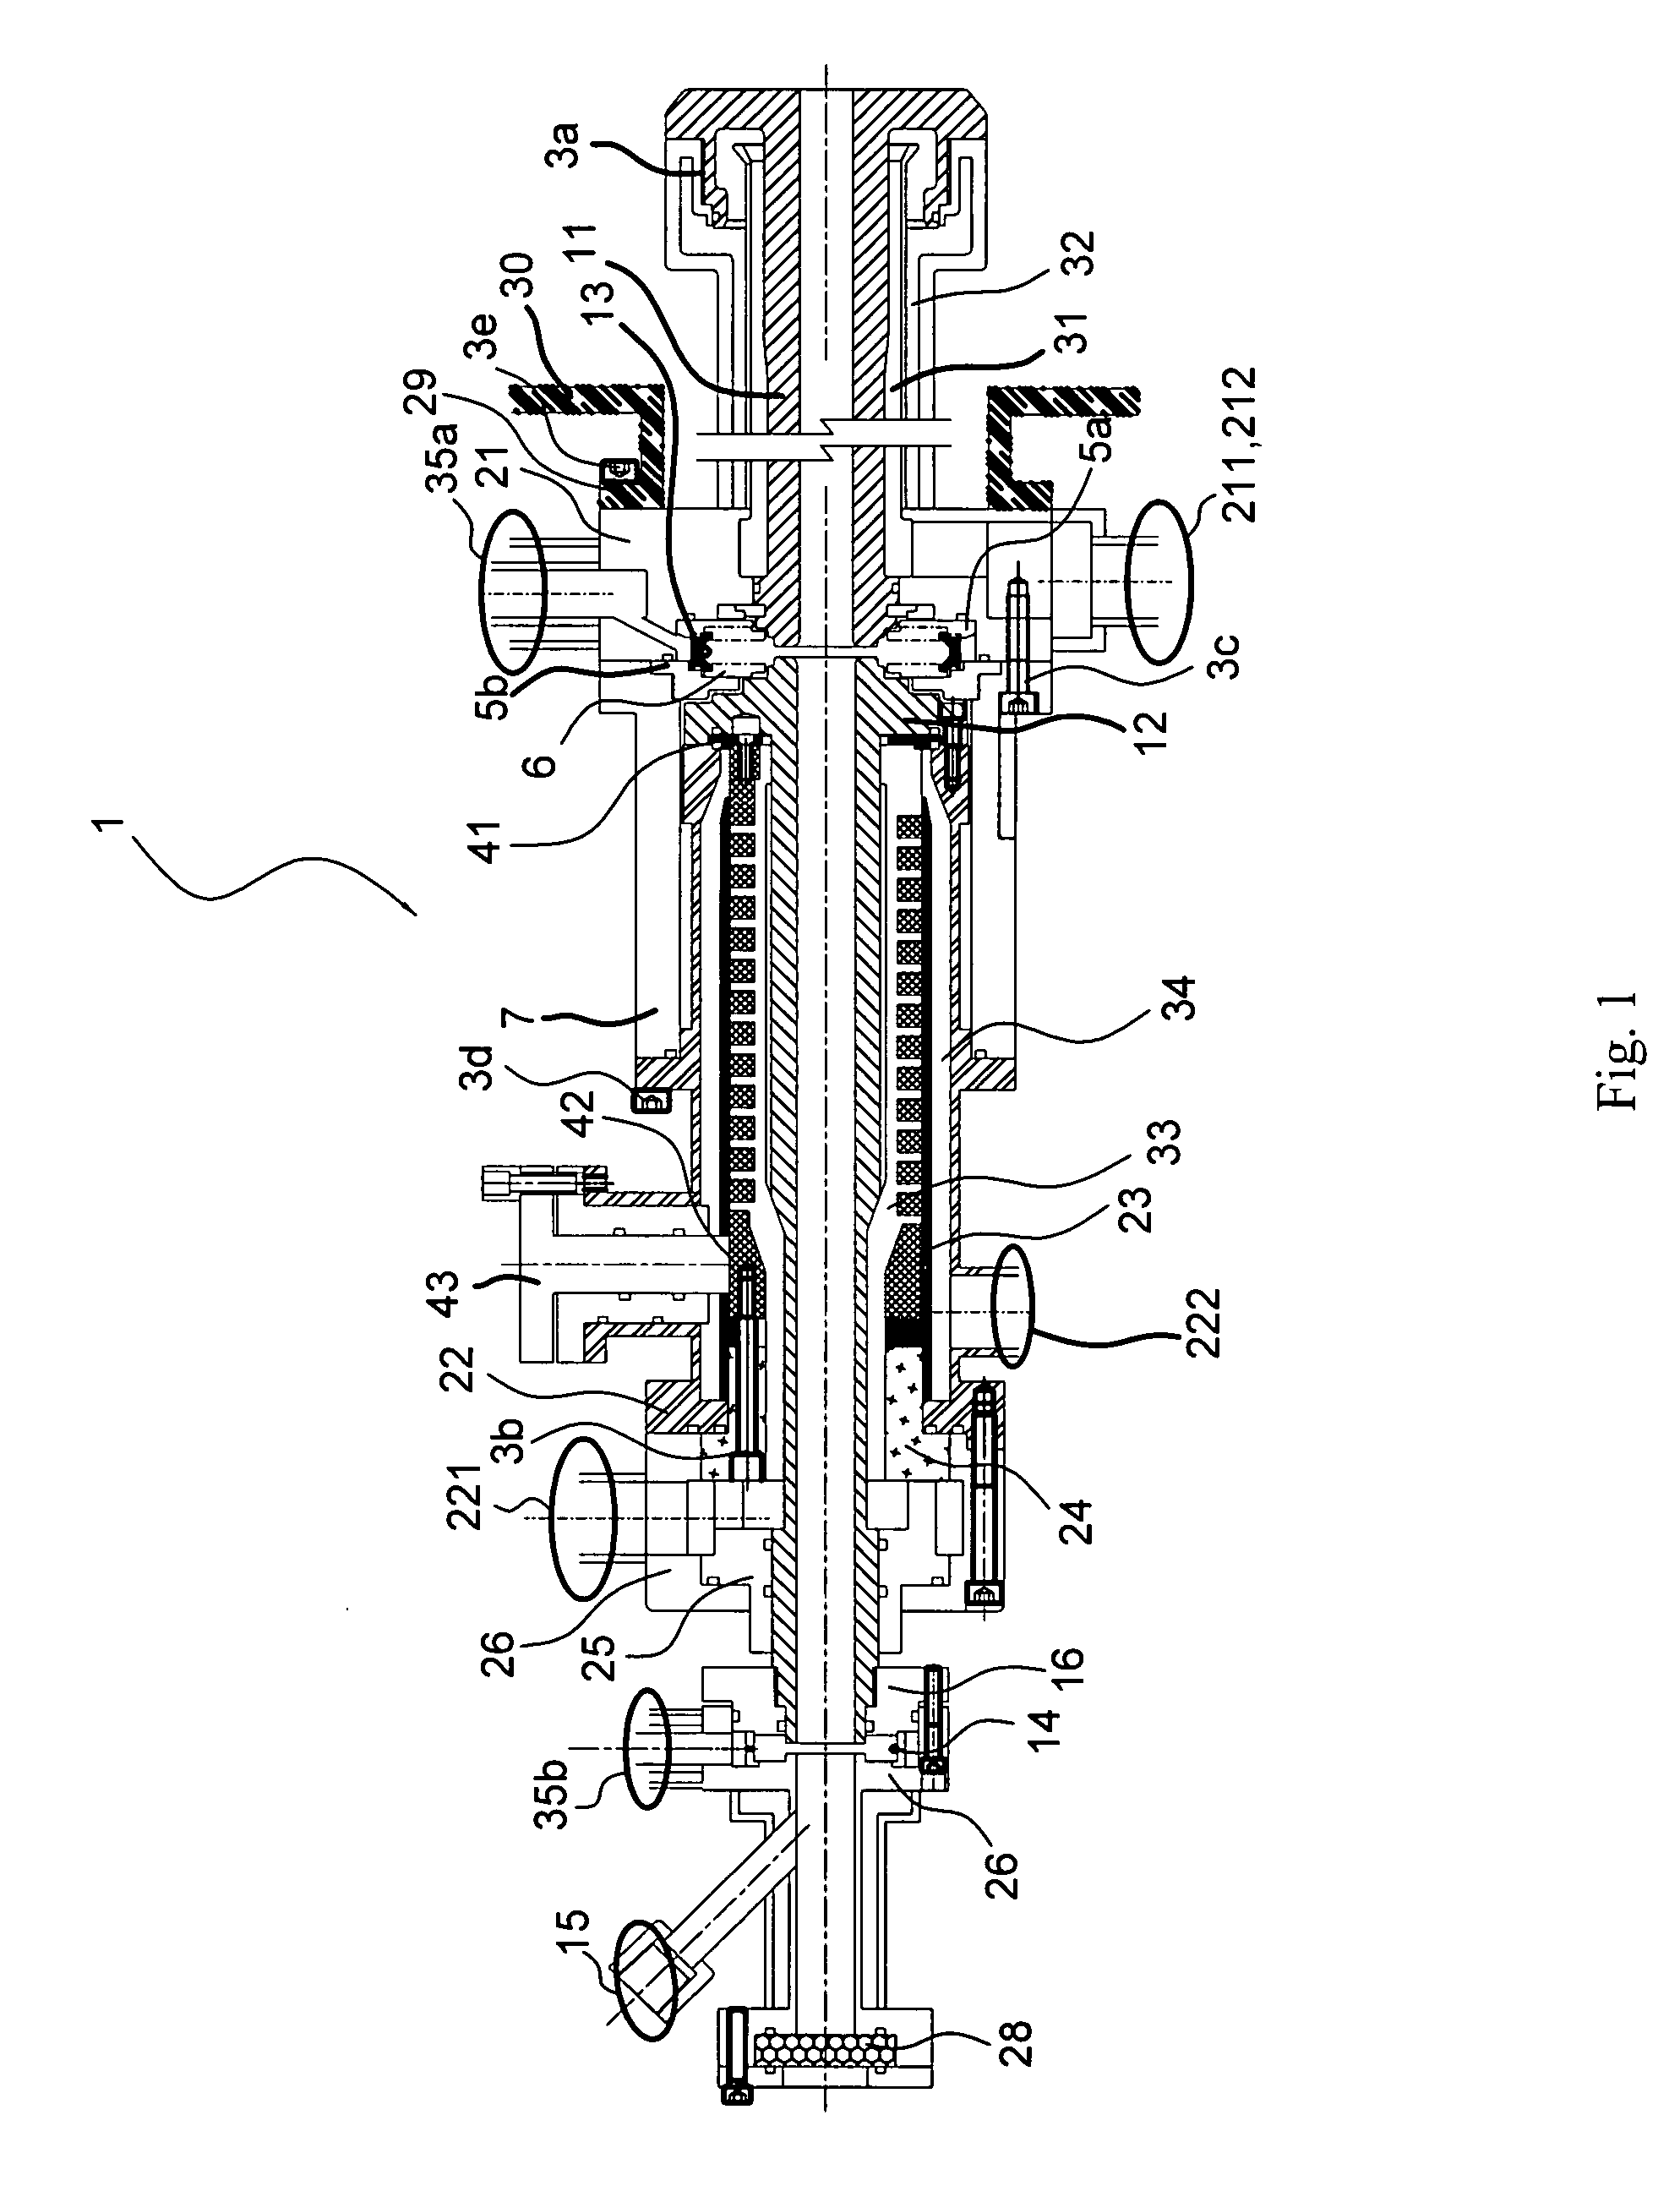 Direct current steam plasma torch and method for reducing the erosion of electrodes thereof